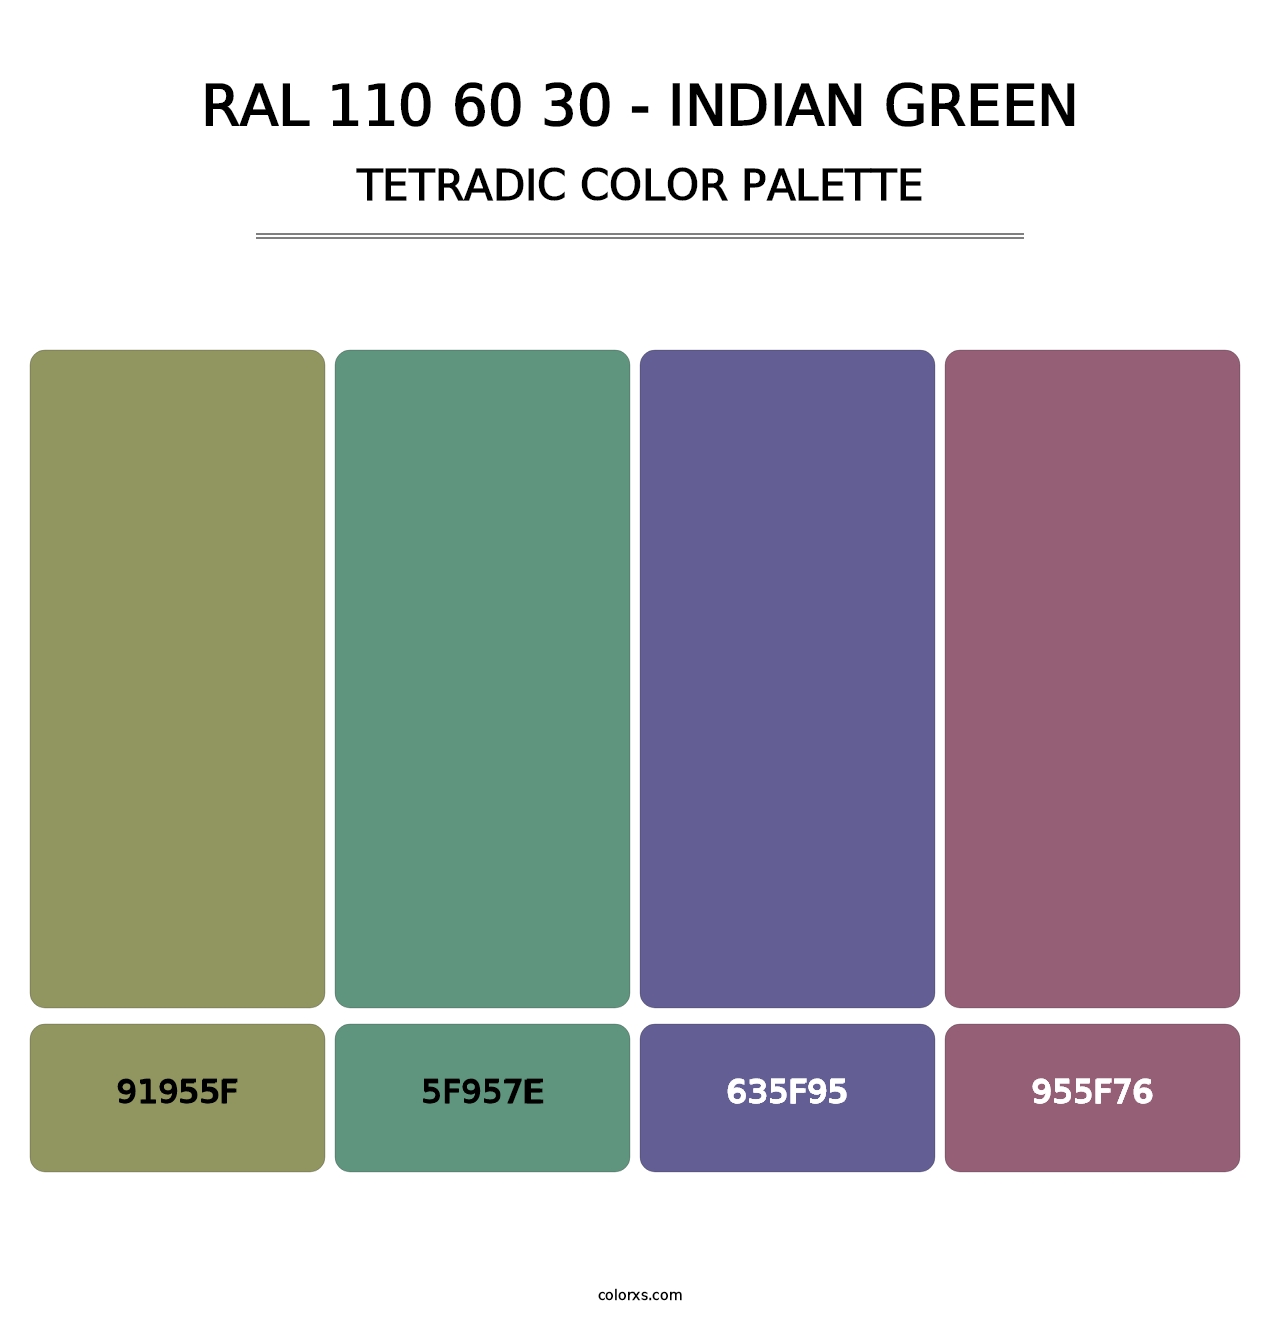 RAL 110 60 30 - Indian Green - Tetradic Color Palette